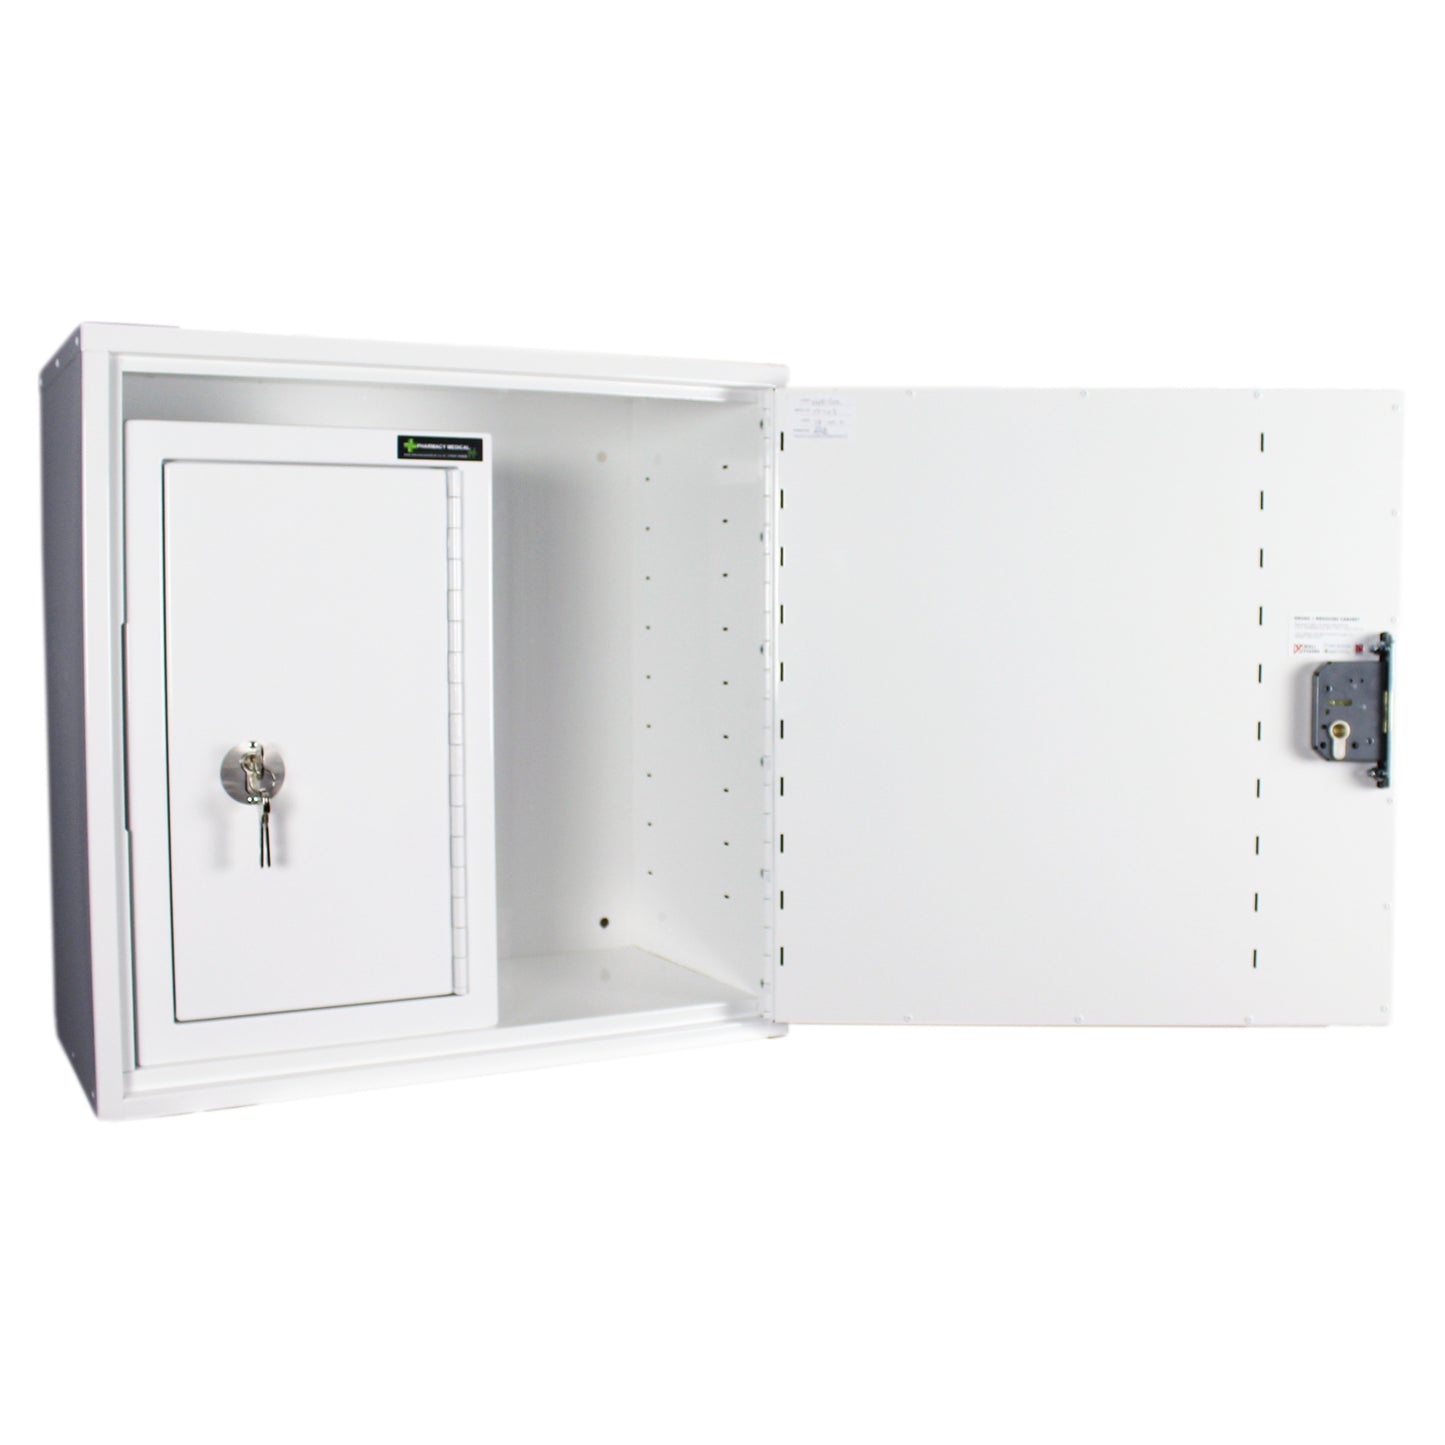 Pharmacy Medical - HECCMC200A MEDICINE / DRUGS CABINET 600 X 600 X 300mm | SINGLE DOOR, 2 FULL DEPTH SHELVES | R/H HINGE - with internal: CONTROLLED DRUGS CABINET S, M or L | 1 SHELF (Removable) | R/H HINGE